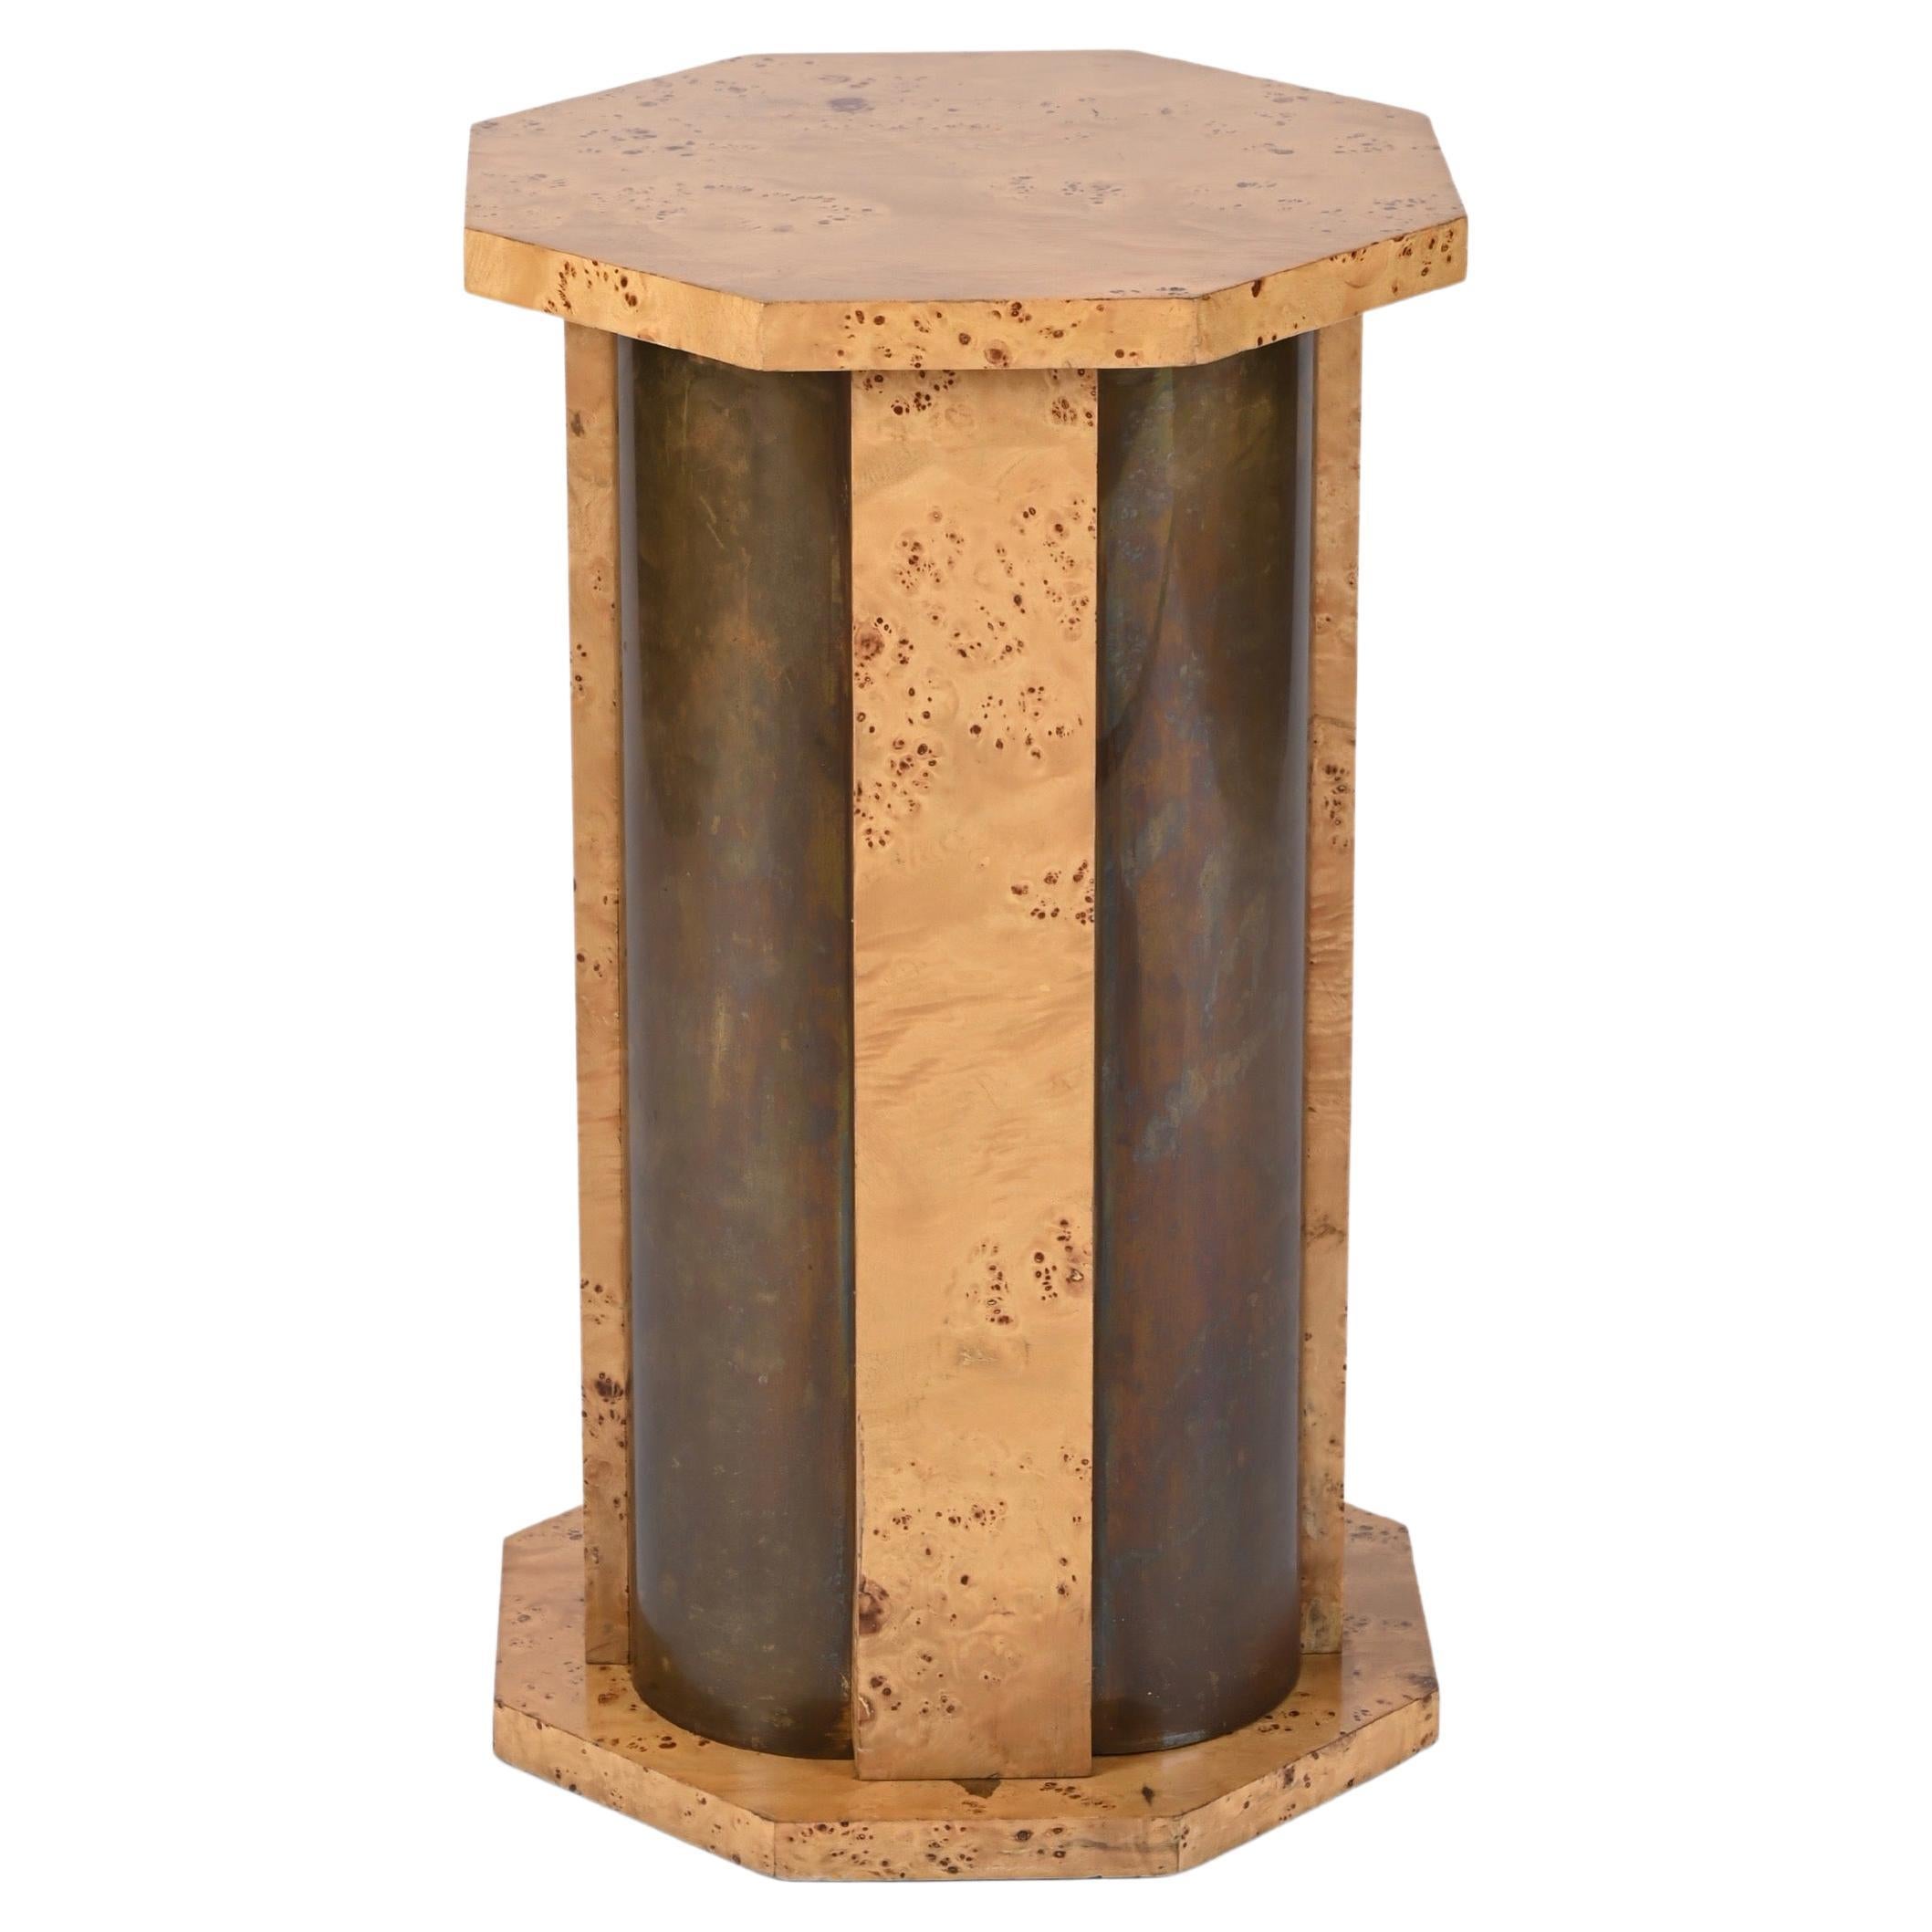 Tommaso Barbi Octagonal Table Pedestal in Burl Wood and Brass, Italy, 1970 For Sale